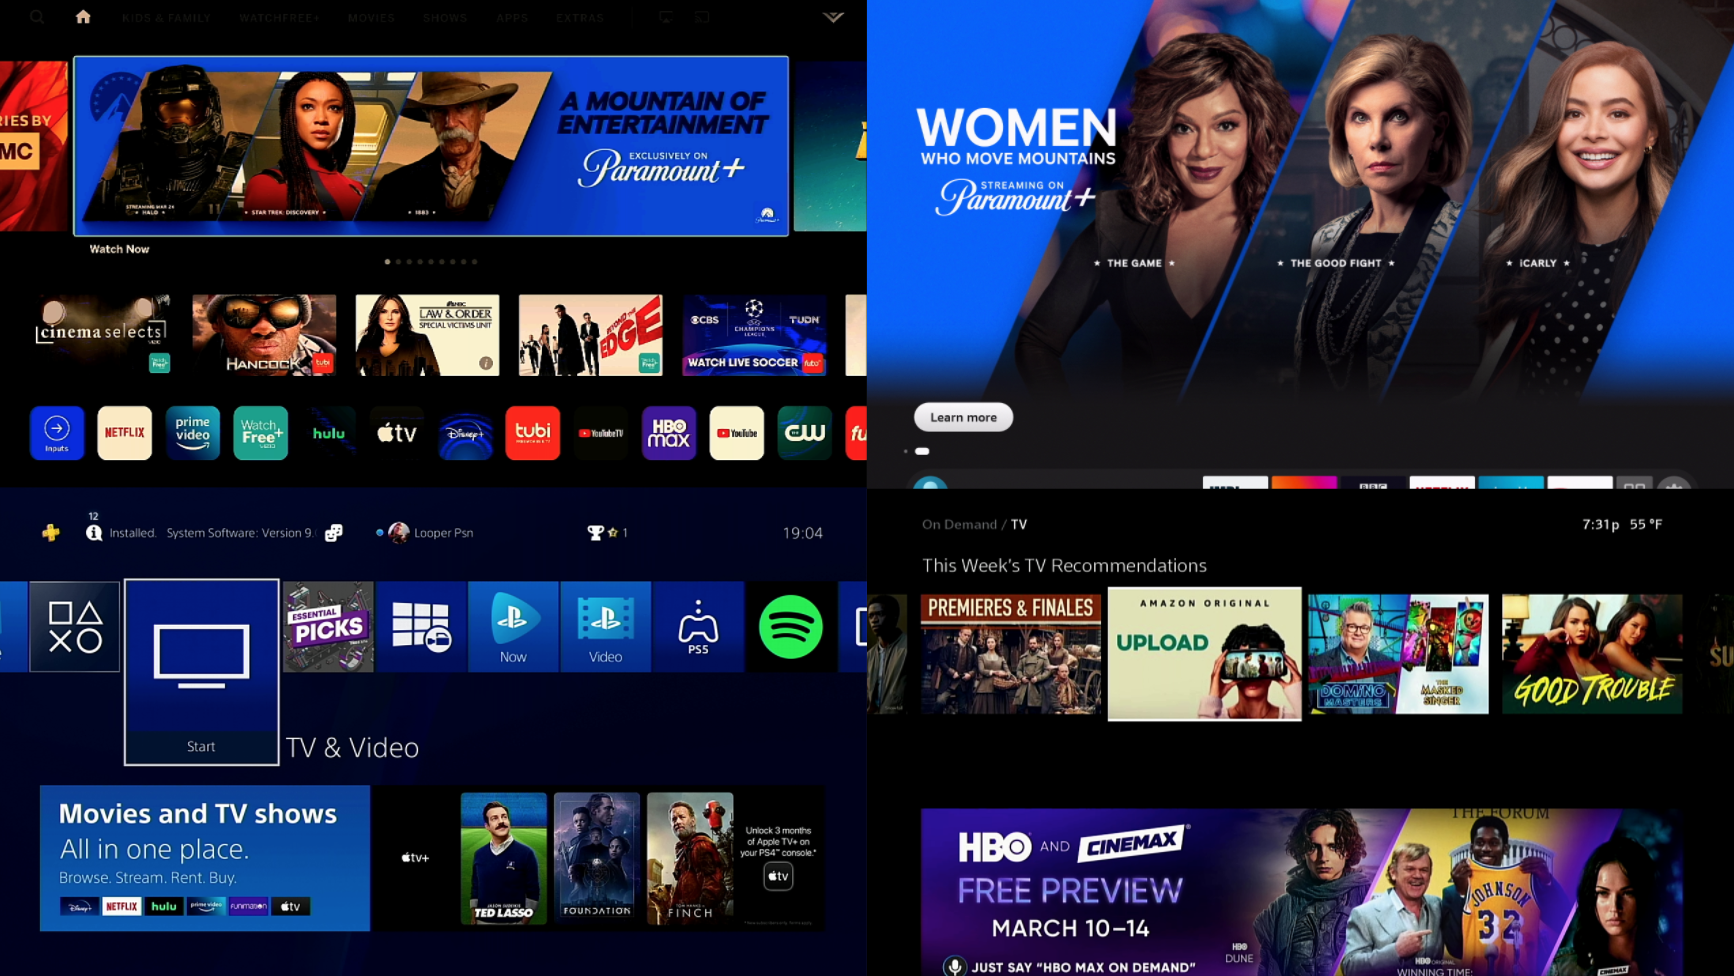 Paramount+, Apple TV+, HBO Max a triple threat